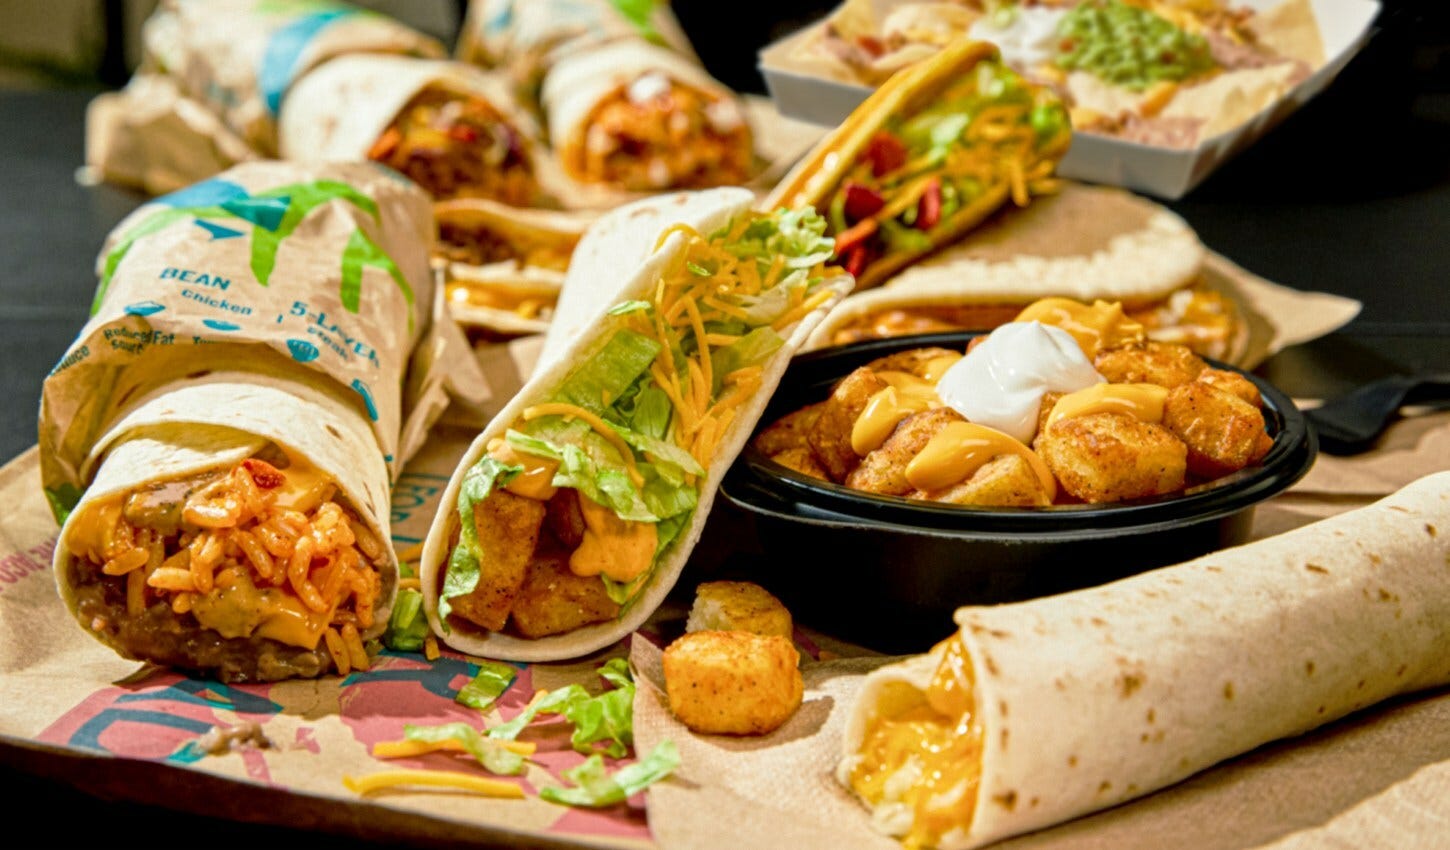 taco bell is adding 'meal-sized' menu items for $3 or less as consumers hunt for fast food bargains